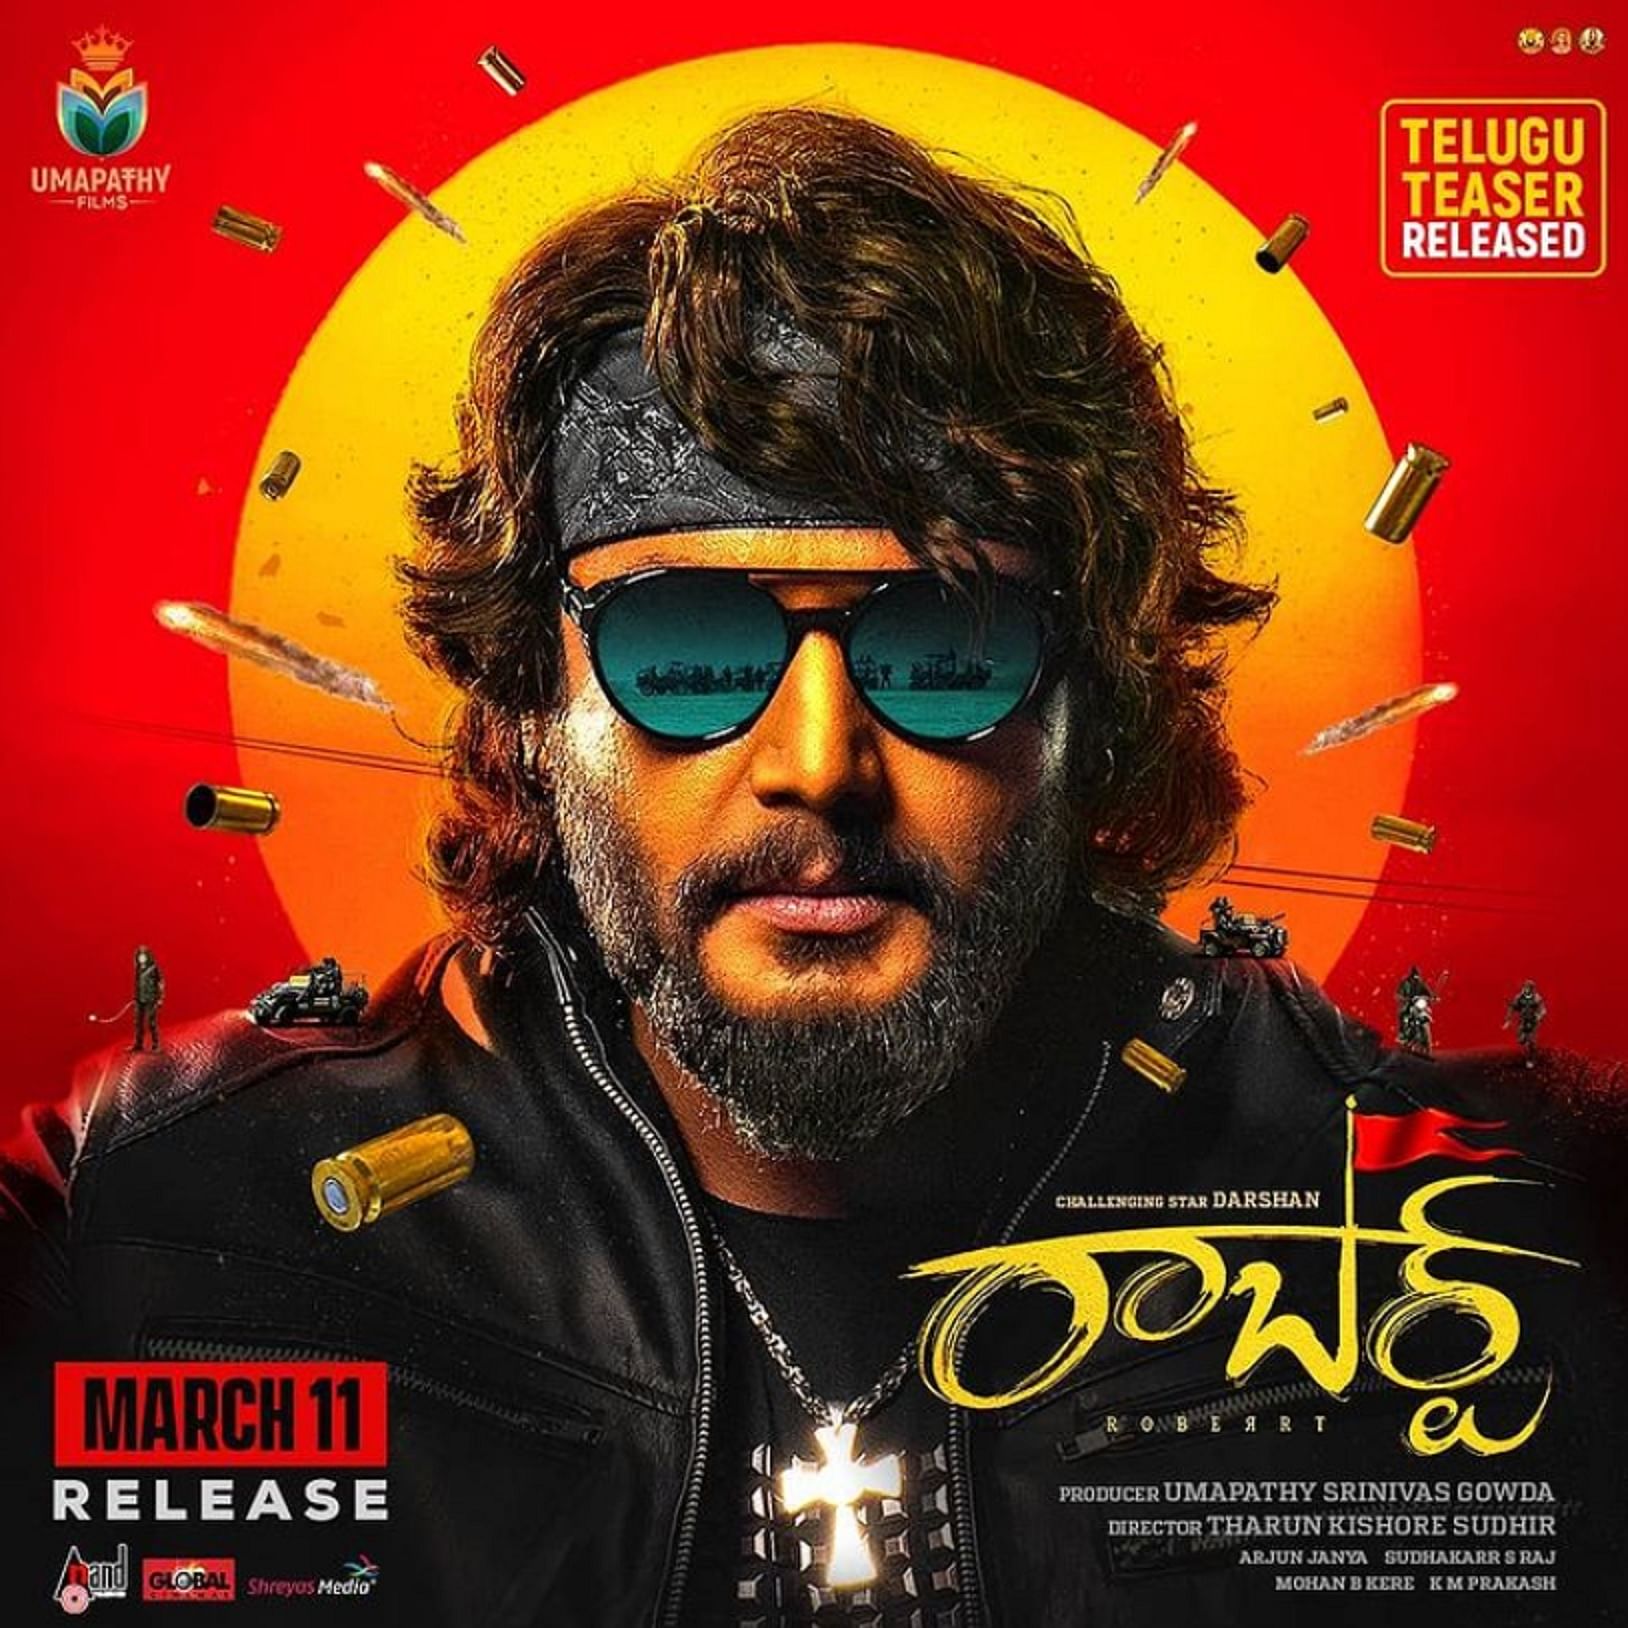 The highly anticipated ‘Roberrt’, starring Darshan, is set to release on March 11.